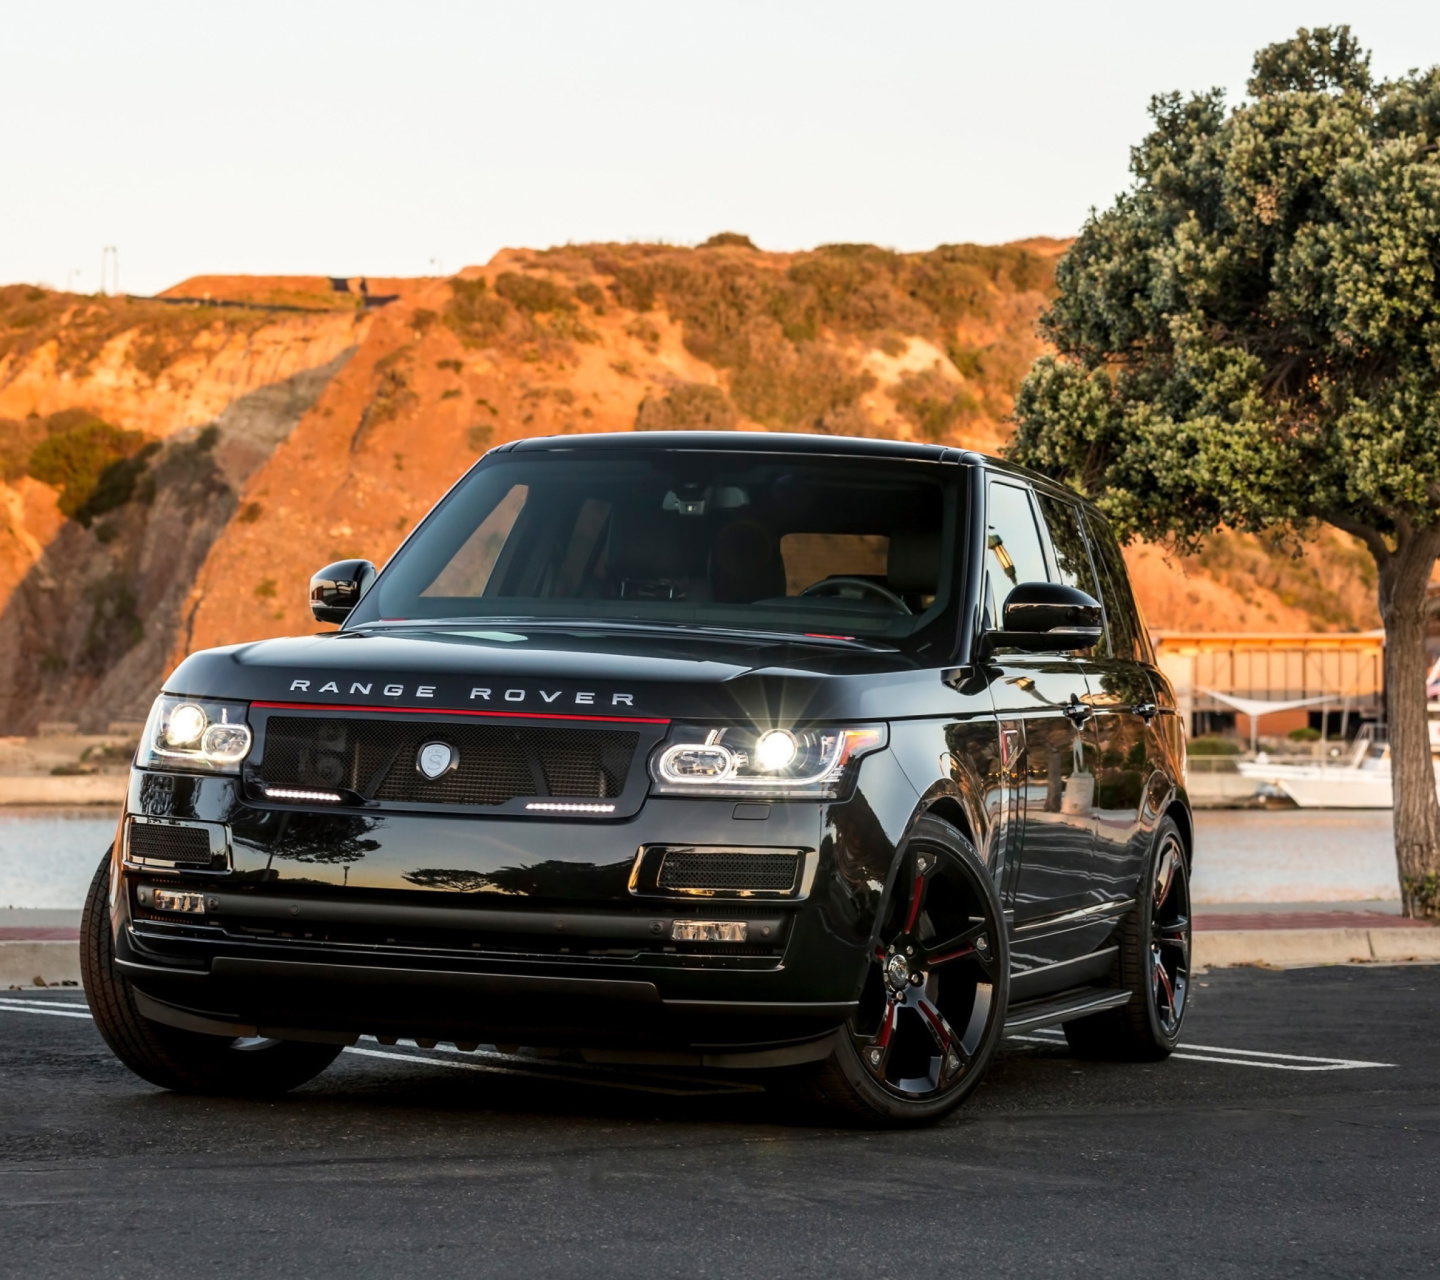 Range Rover STRUT with Grille Package screenshot #1 1440x1280